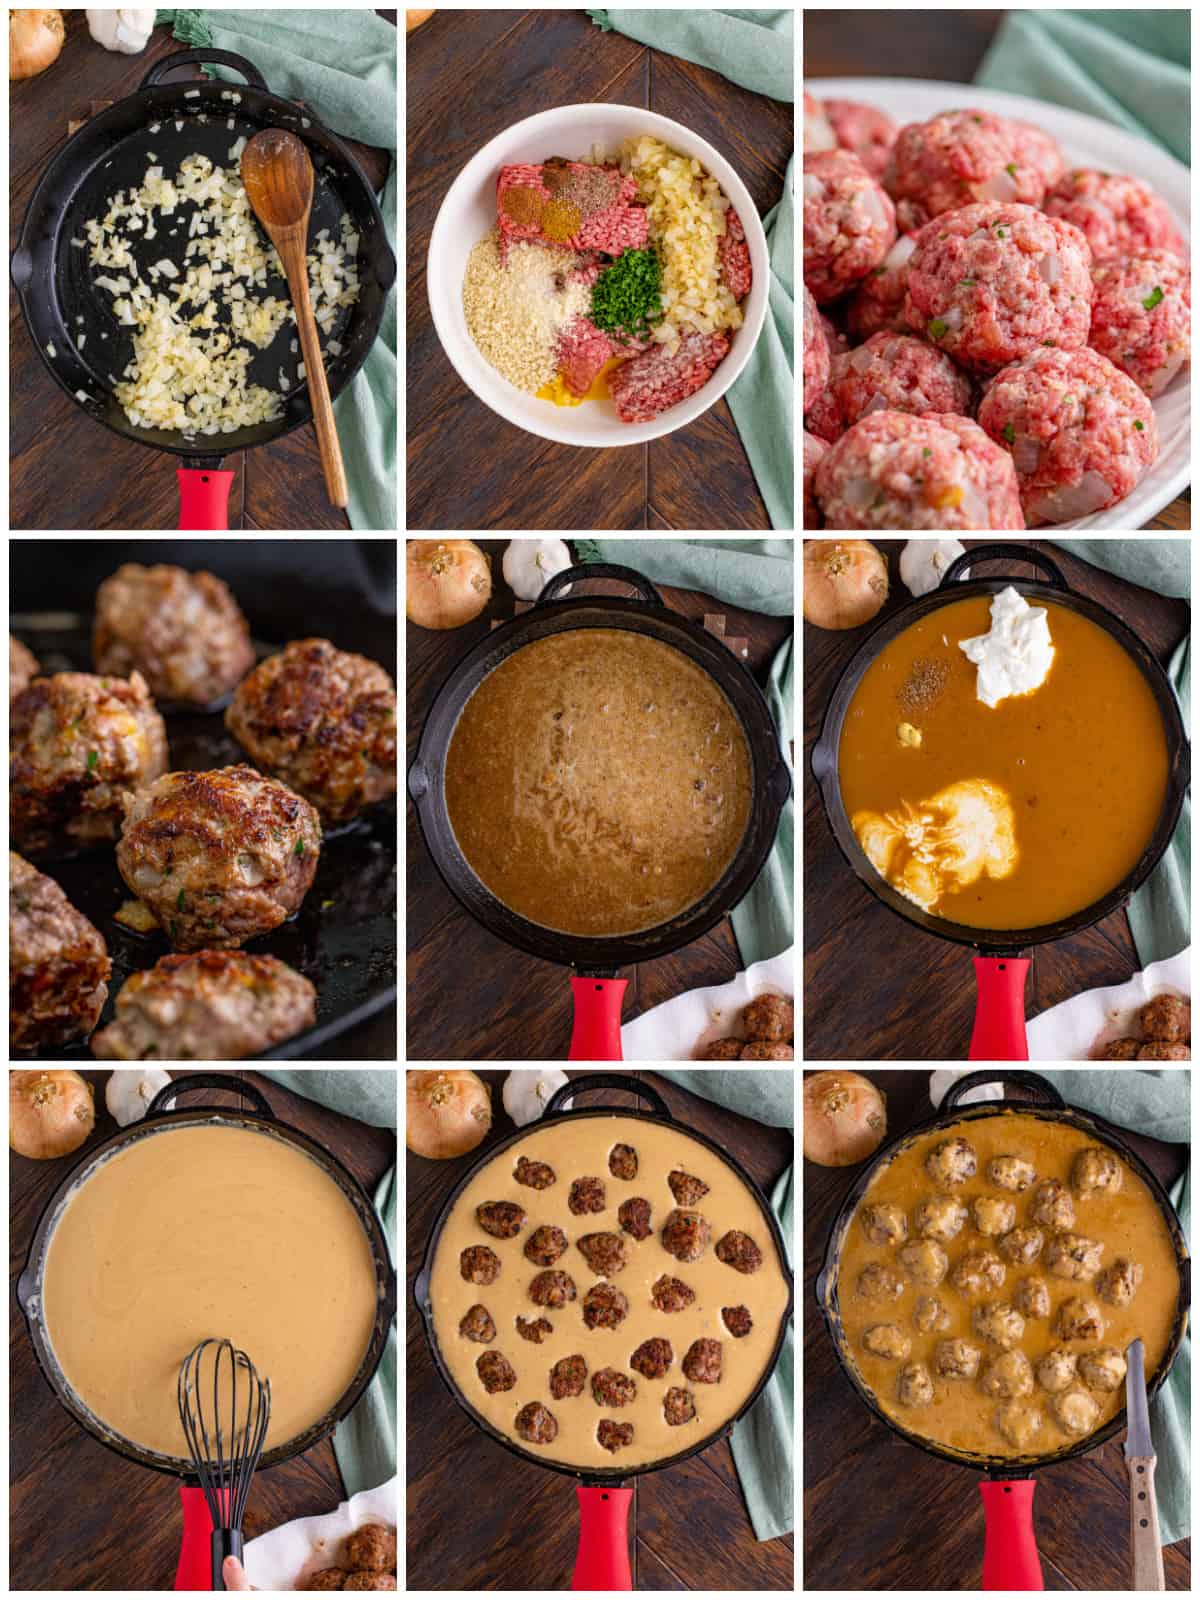 Step by step photos on how to make Swedish Meatballs.